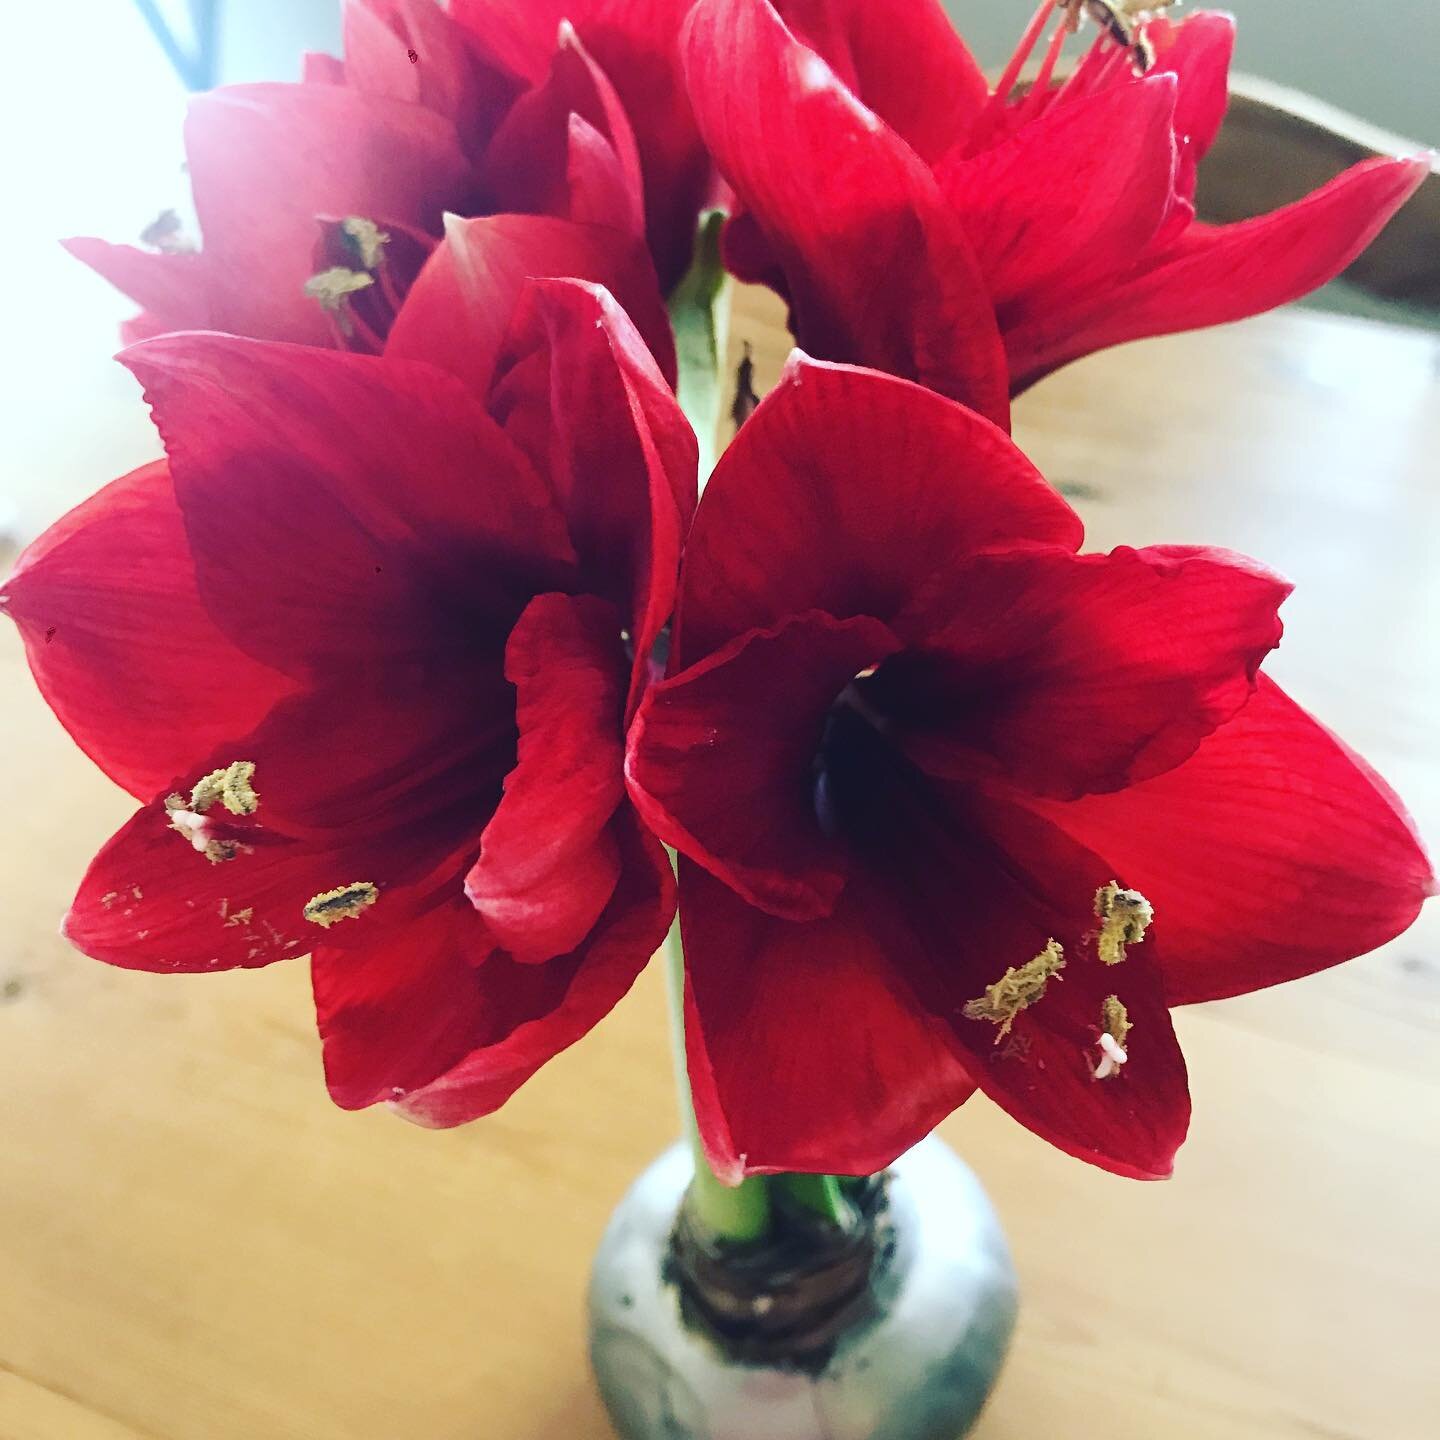 Mi Amore...you are so beautiful 🌺&hearts;️💫💝 there are 6 gorgeous flowers that all blossomed at the same time with a 7th on the way. How does nature do it? Amazing. No soil needed. #traderjoesflowers #justforfun #ilovefreshflowers